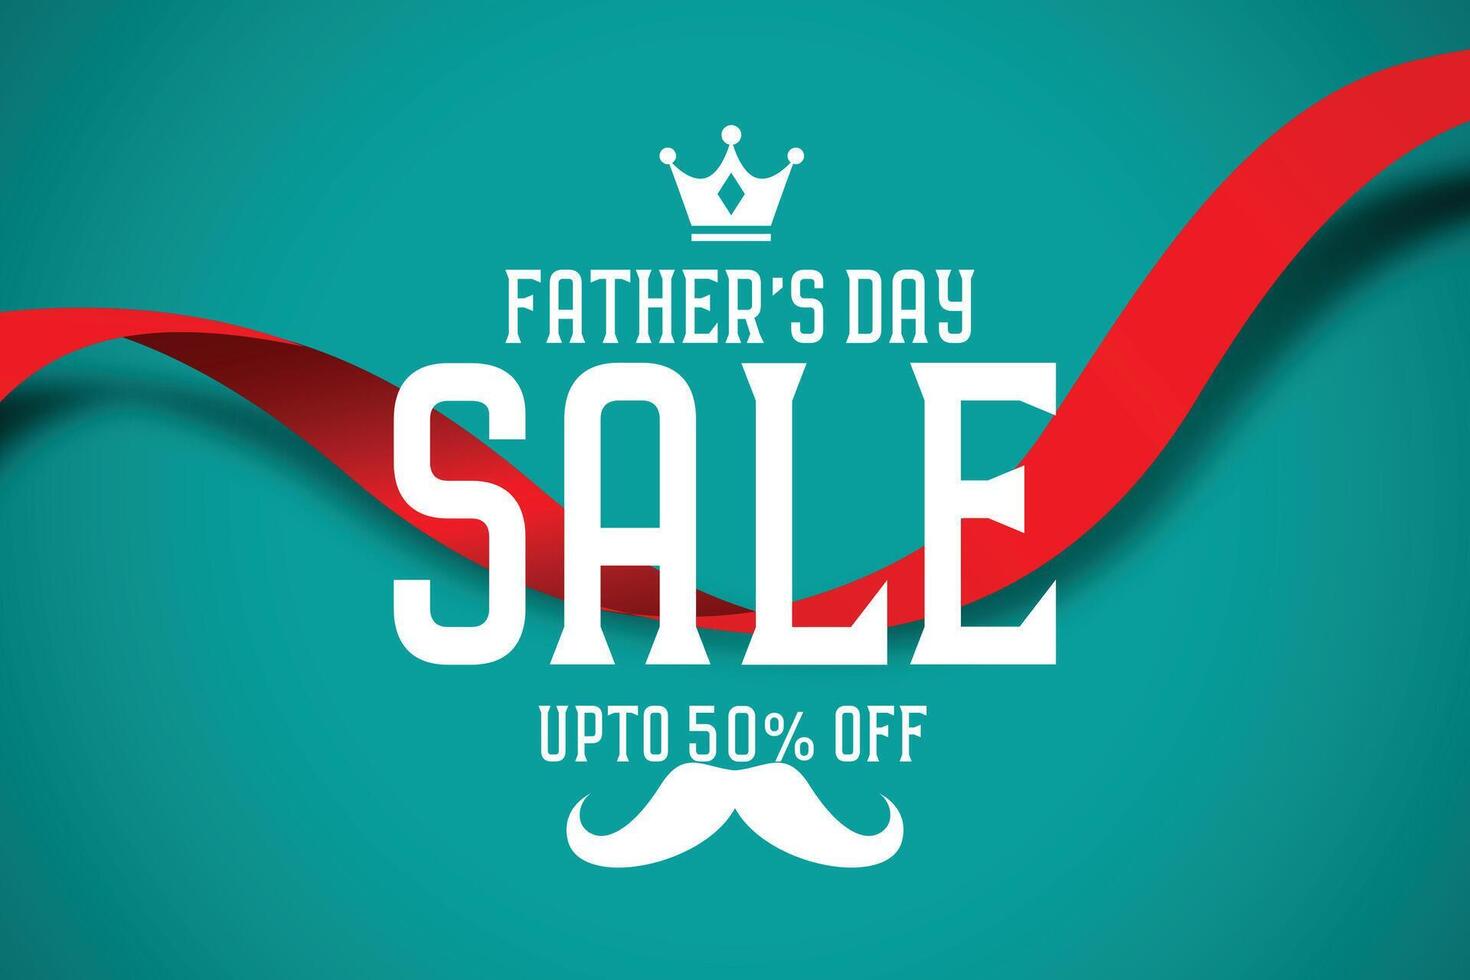 ribbon style father's day banner with sale offer details vector